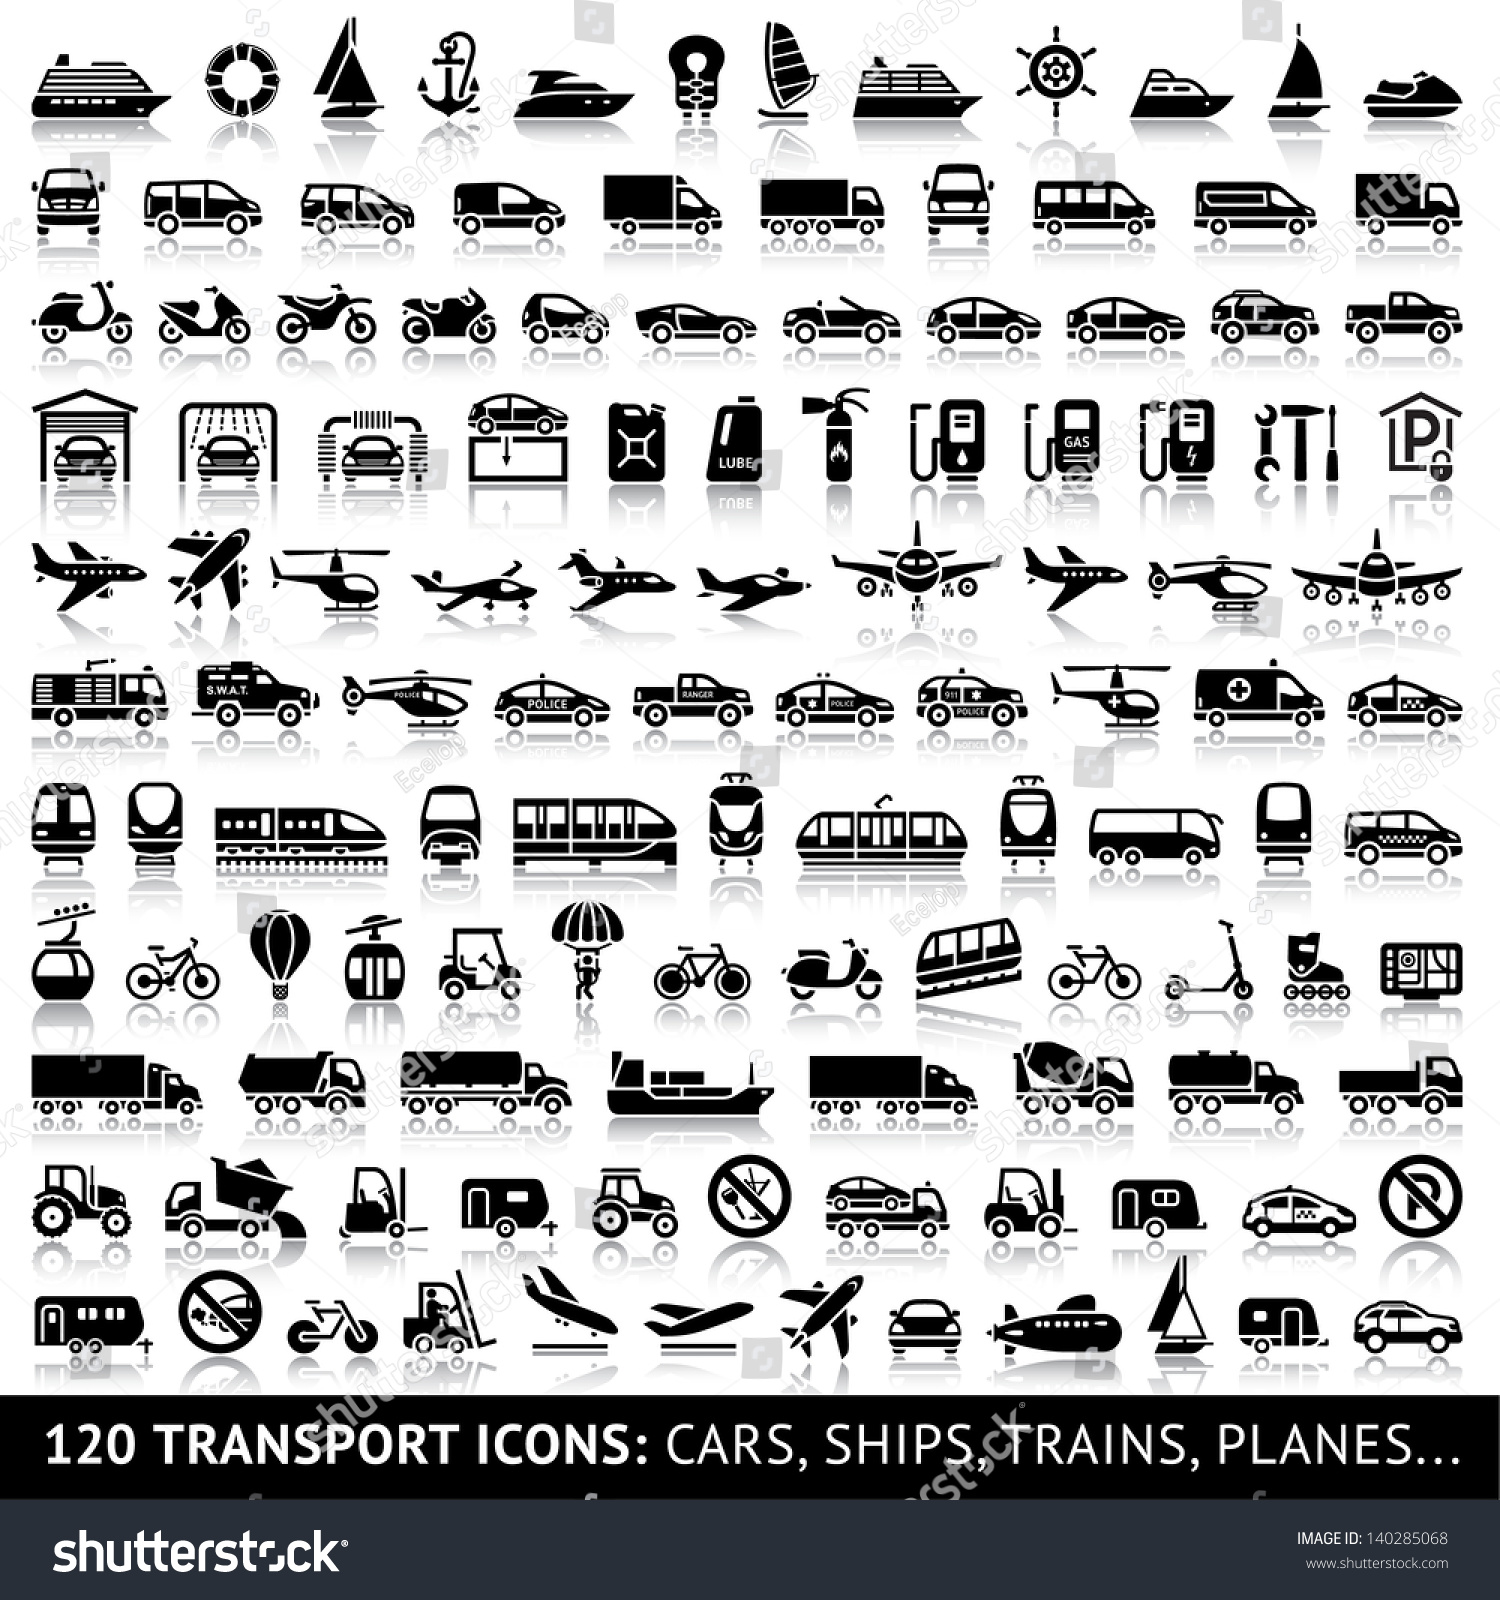 SVG of 120 Transport icon with reflection: Cars, Ships, Trains, Planes..., vector illustrations, set silhouettes isolated on white background. svg